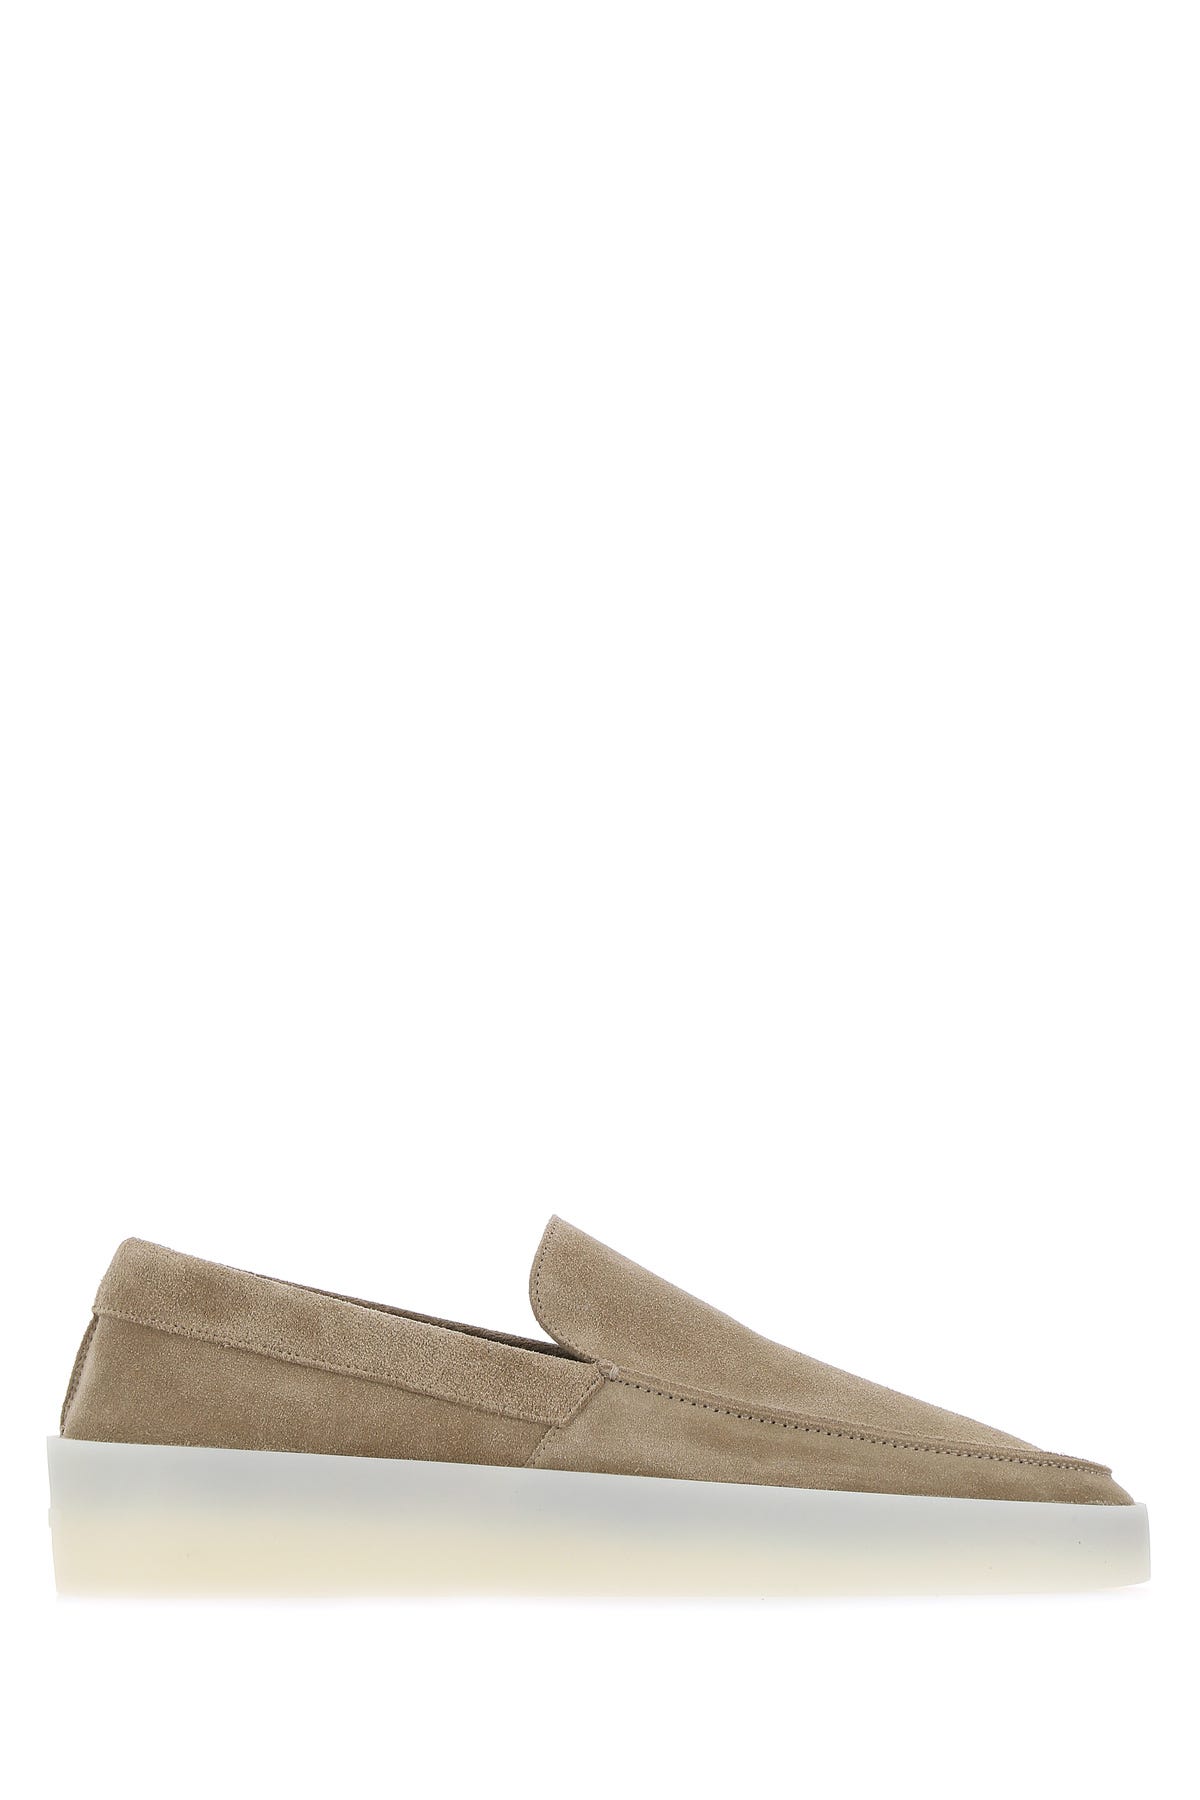 Fear Of God Suedes SNEAKERS-45